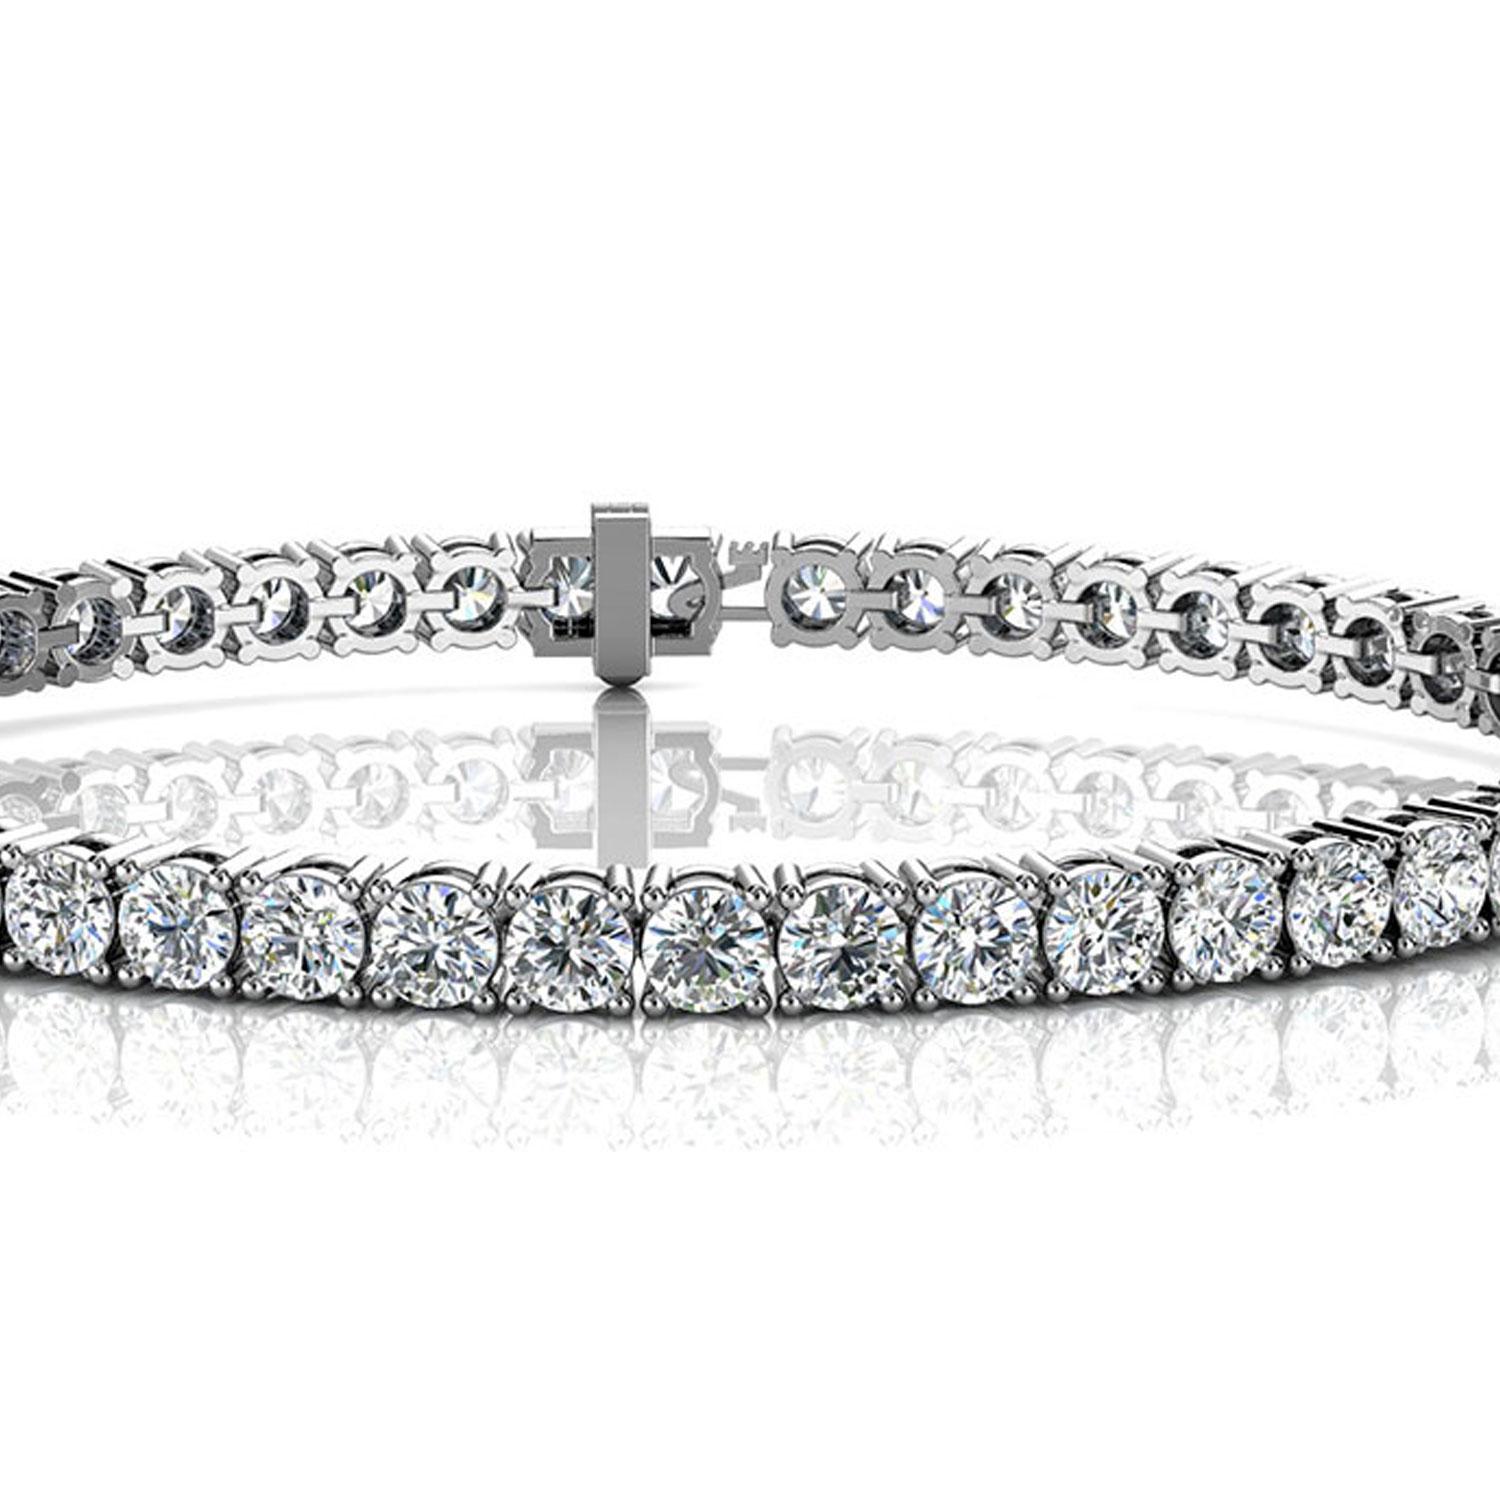 A timeless four prongs diamonds tennis bracelet. Experience the Difference!

Product details: 

Center Gemstone Type: NATURAL DIAMOND
Center Gemstone Color: WHITE
Center Gemstone Shape: ROUND
Center Diamond Carat Weight: 7
Metal: 18K White